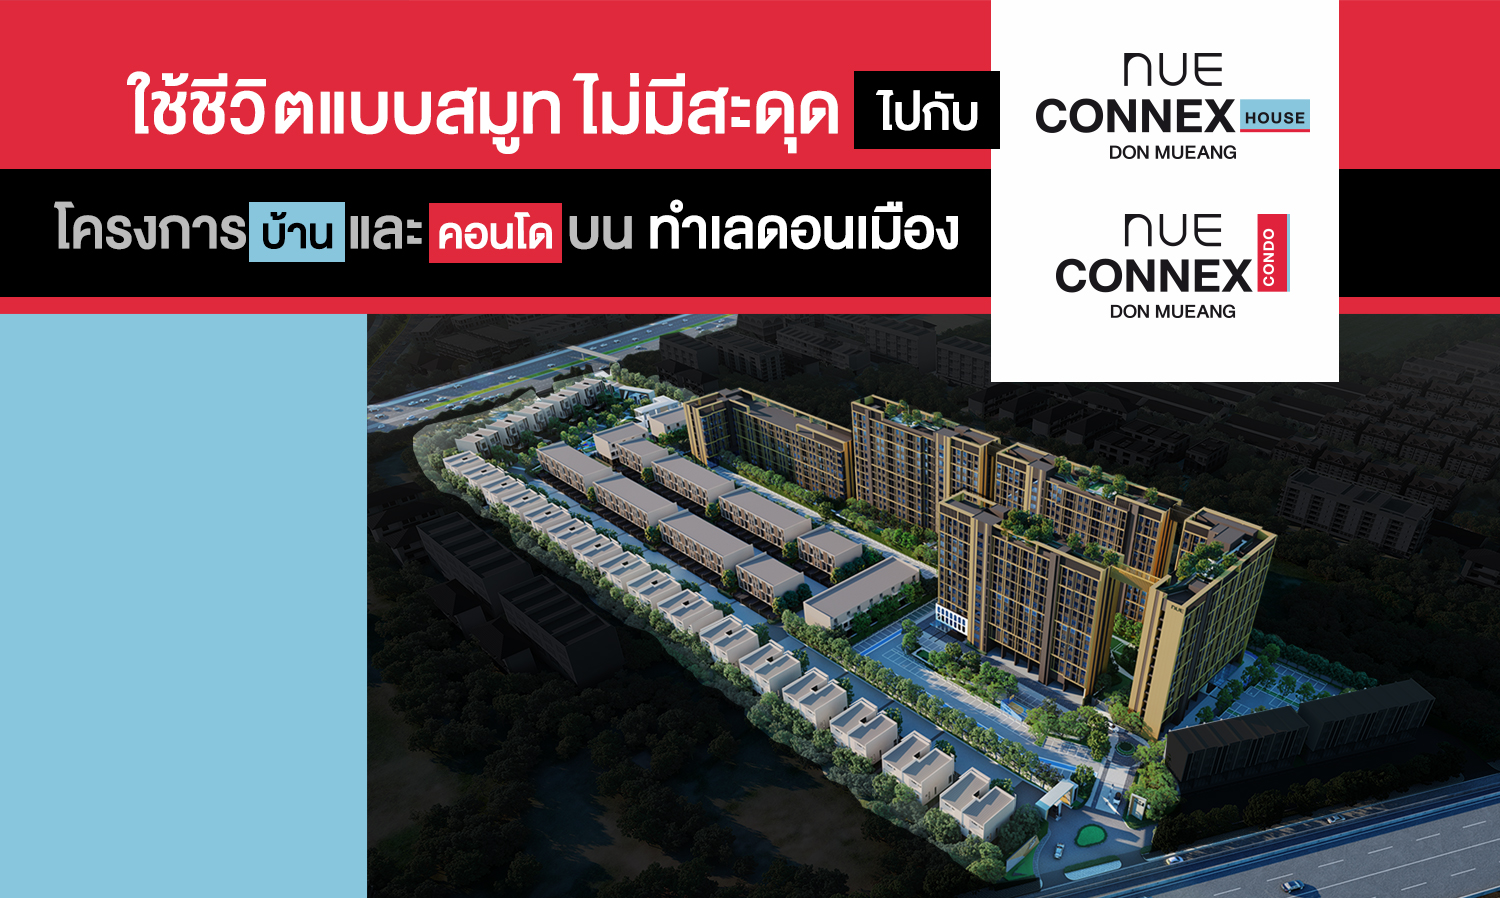 nue-connex-don-mueang